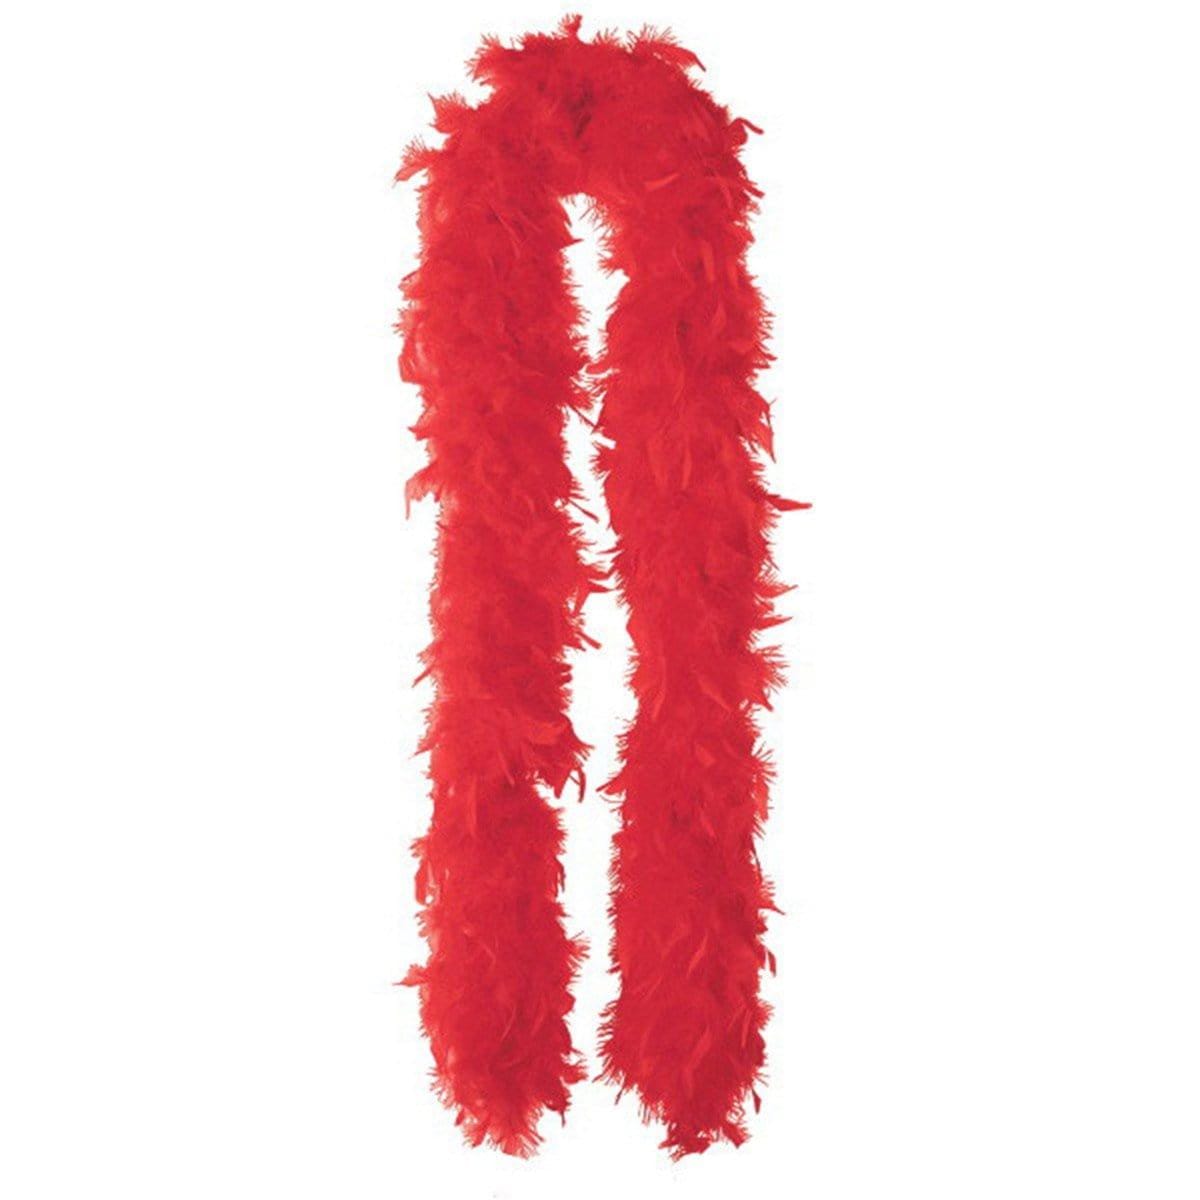 Buy Costume Accessories Red feather boa sold at Party Expert